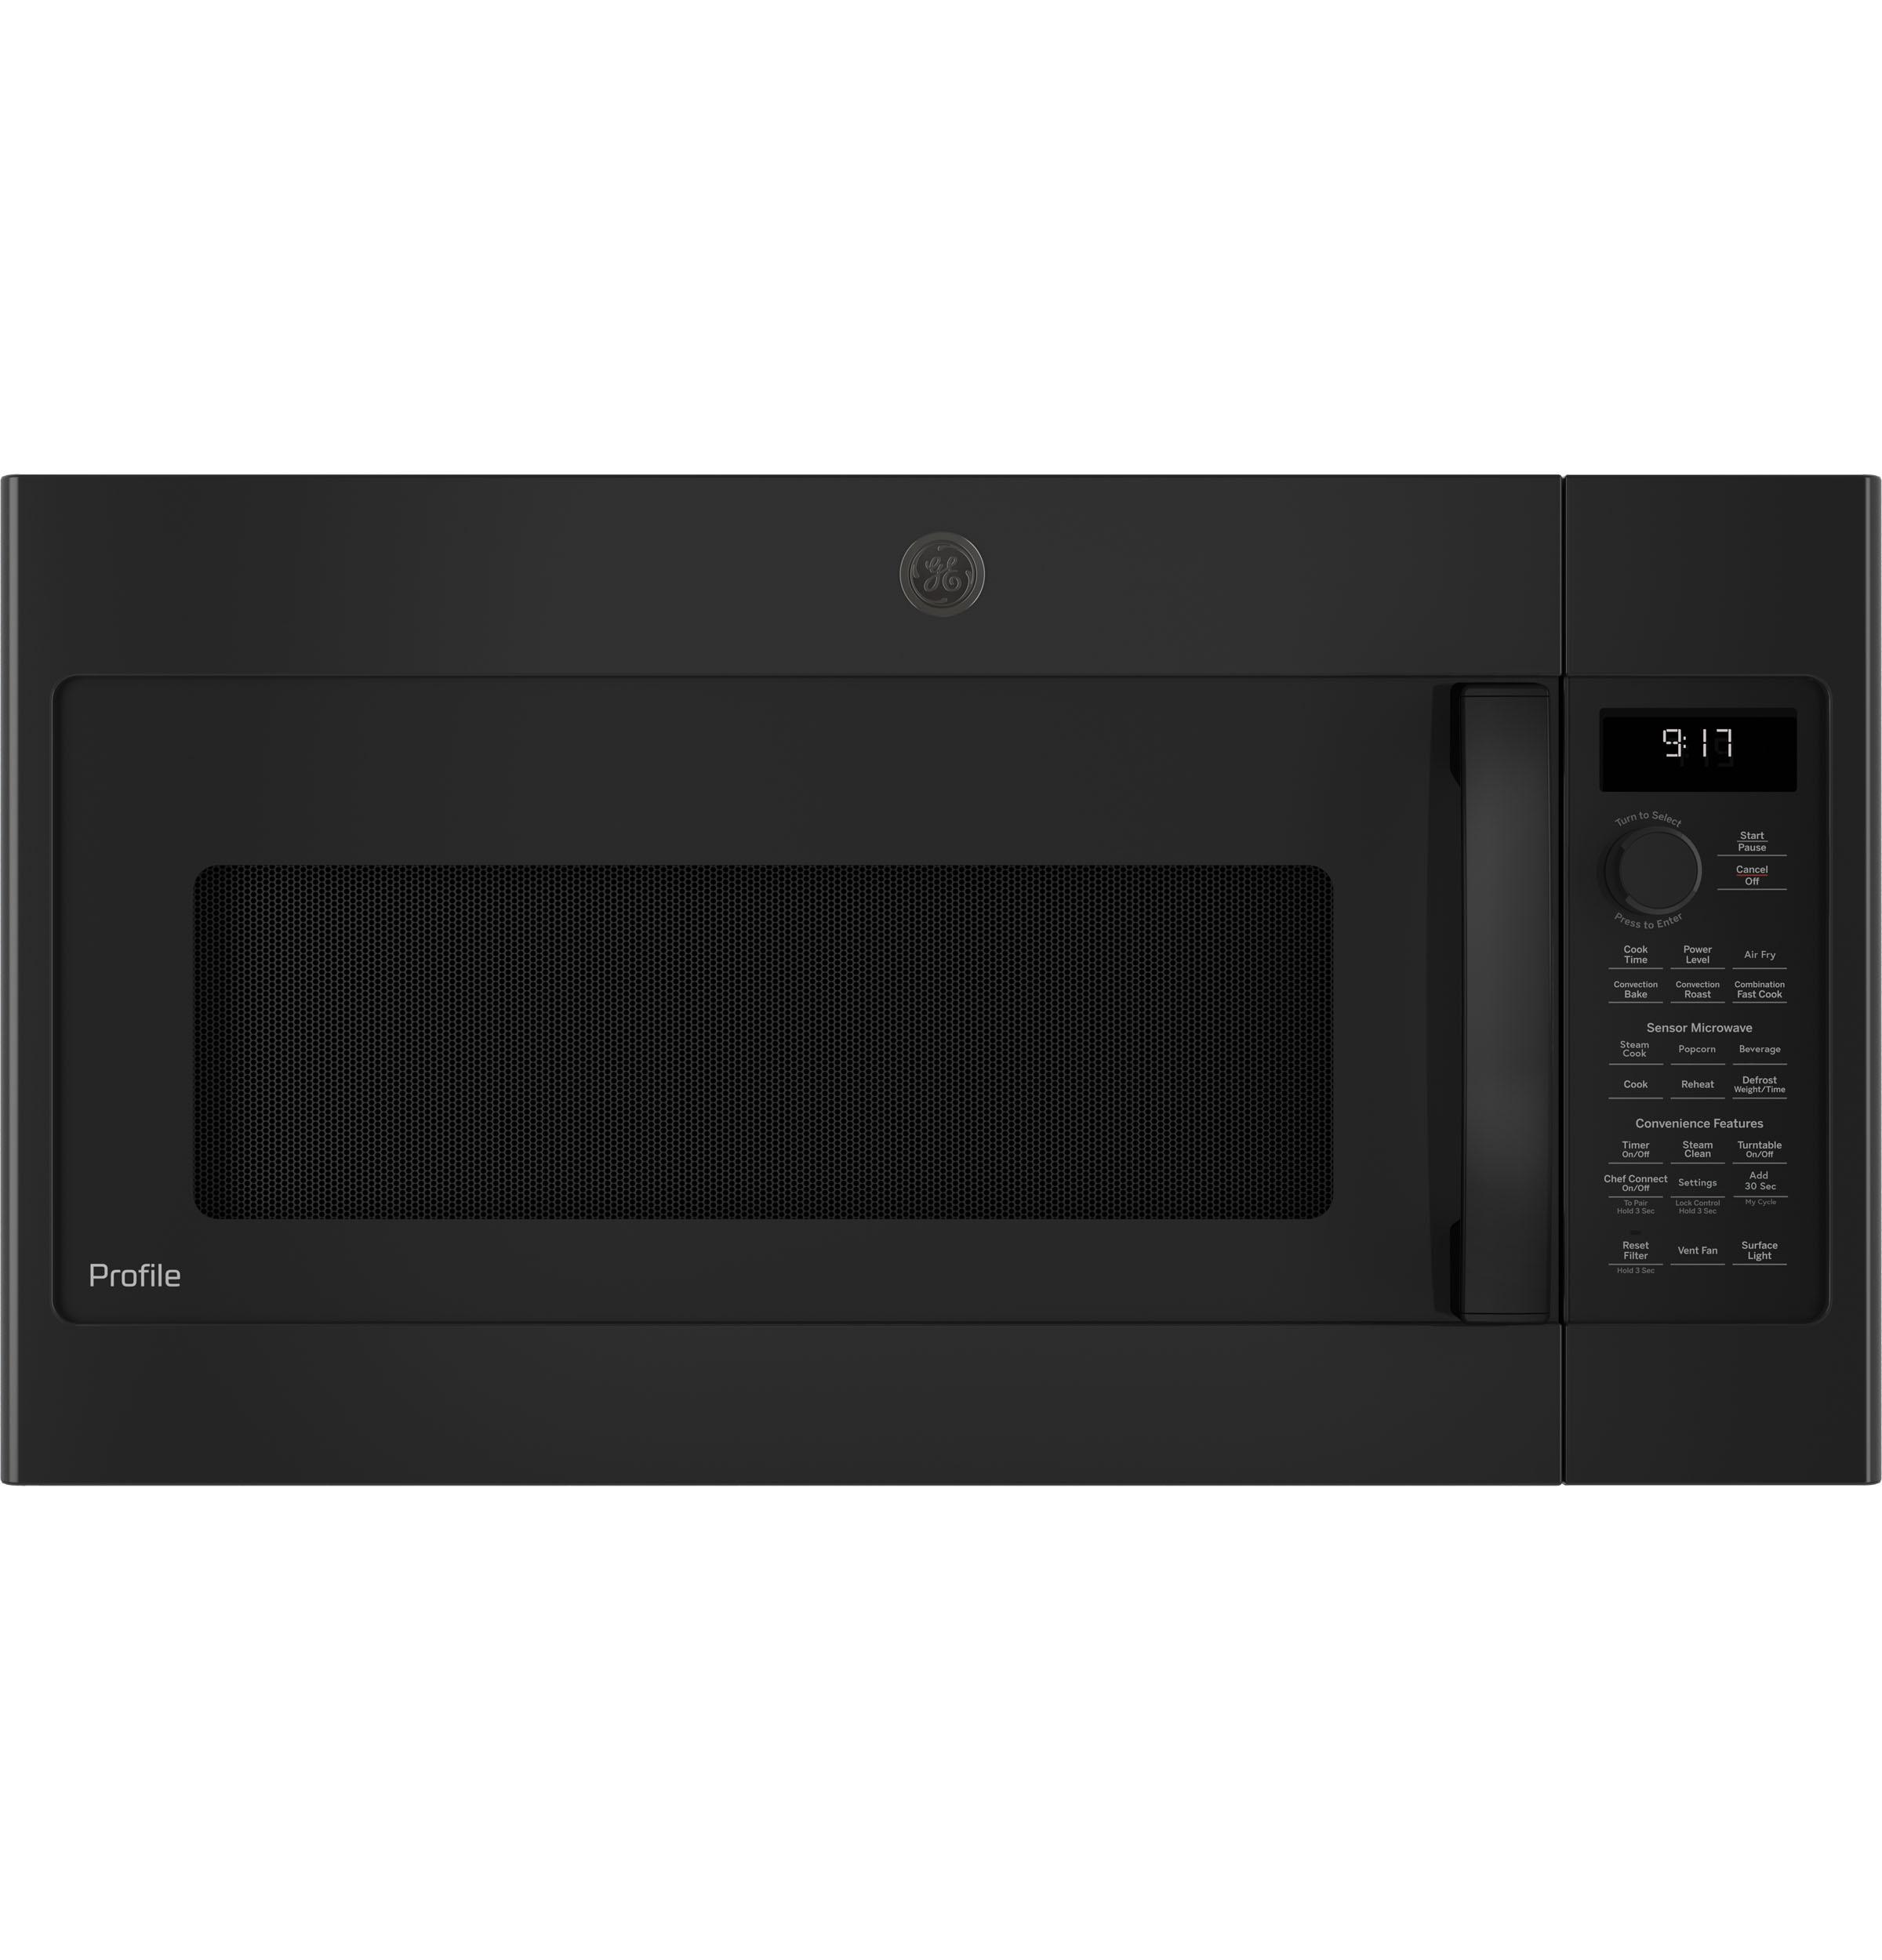 General Electric 1.7 Cu. Ft. Convection Over-the-Range Microwave Oven